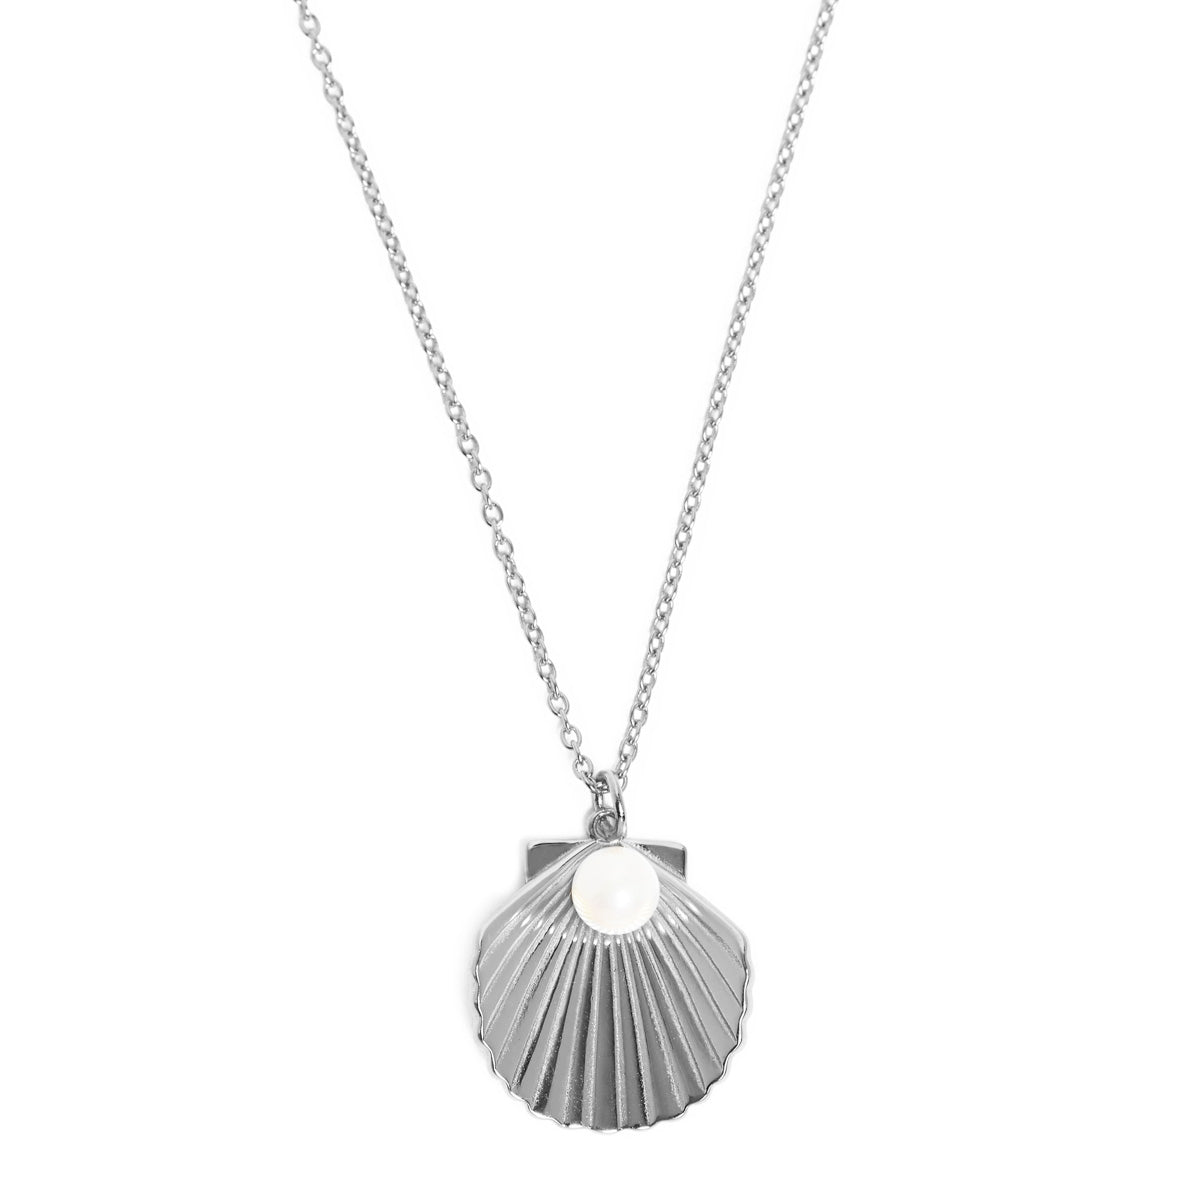 Open Shell Necklace Silver